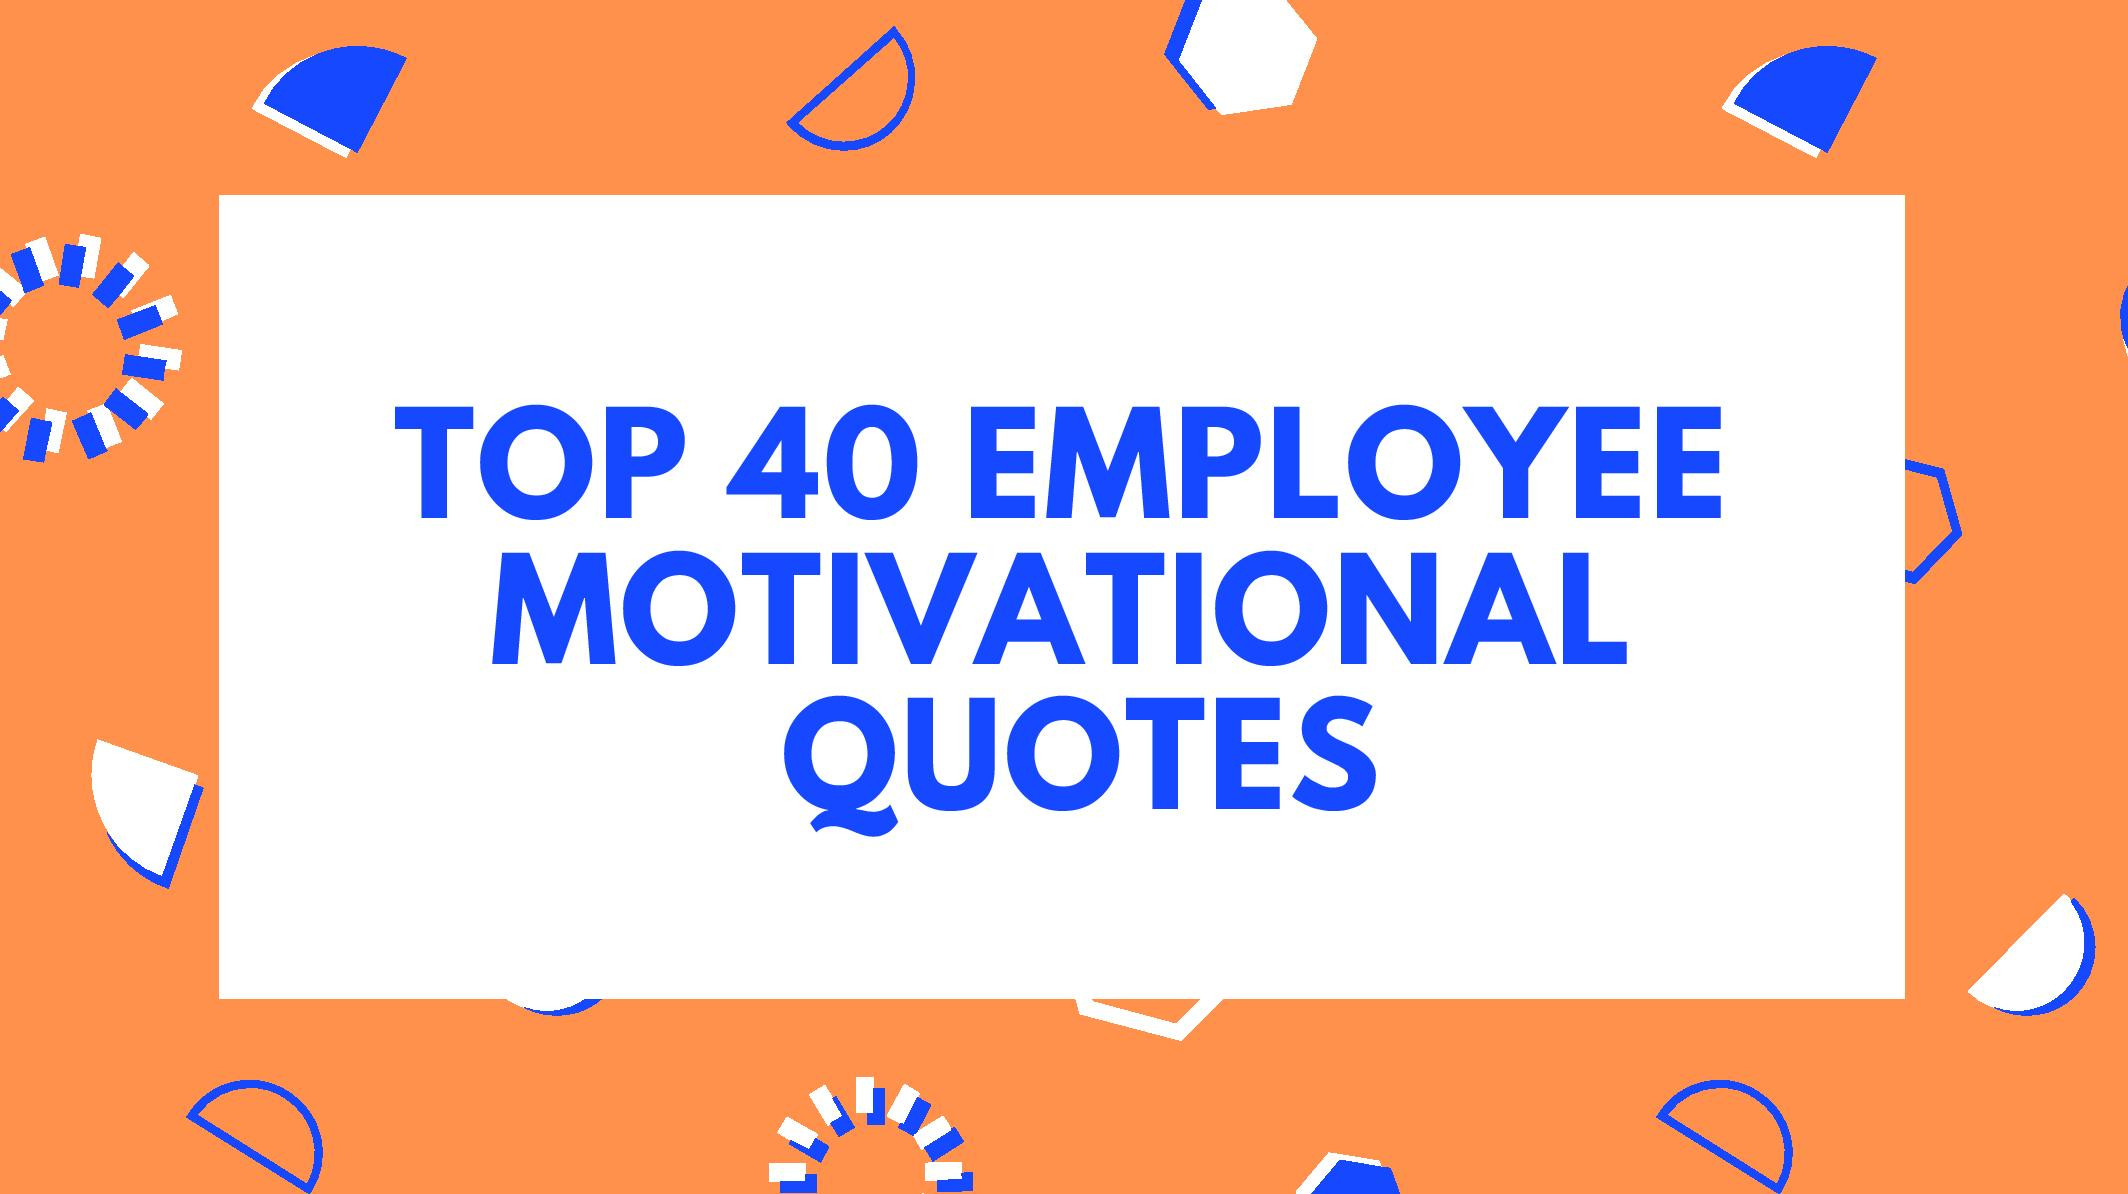 Positive Quotes For Employees
 Top 40 Employee Motivational Quotes To Inspire Your Workforce